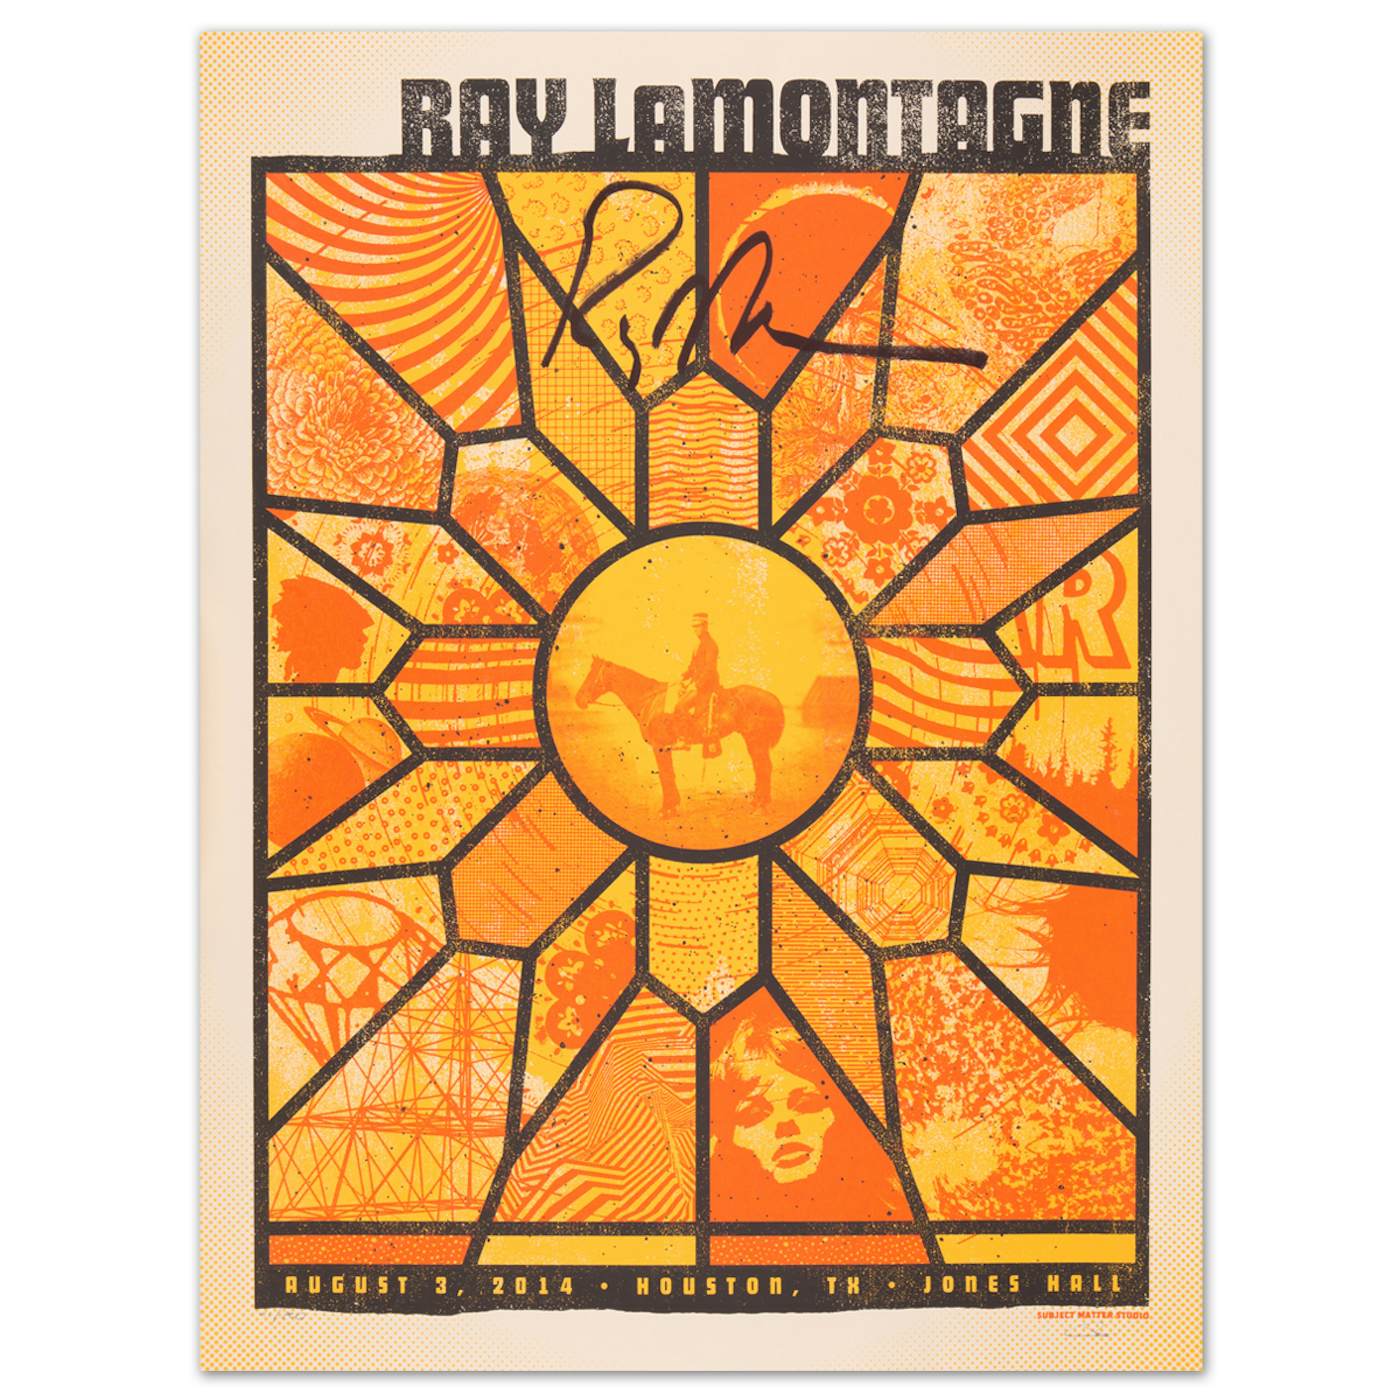 Ray LaMontagne 2014 Houston, TX Event Poster (SIGNED)